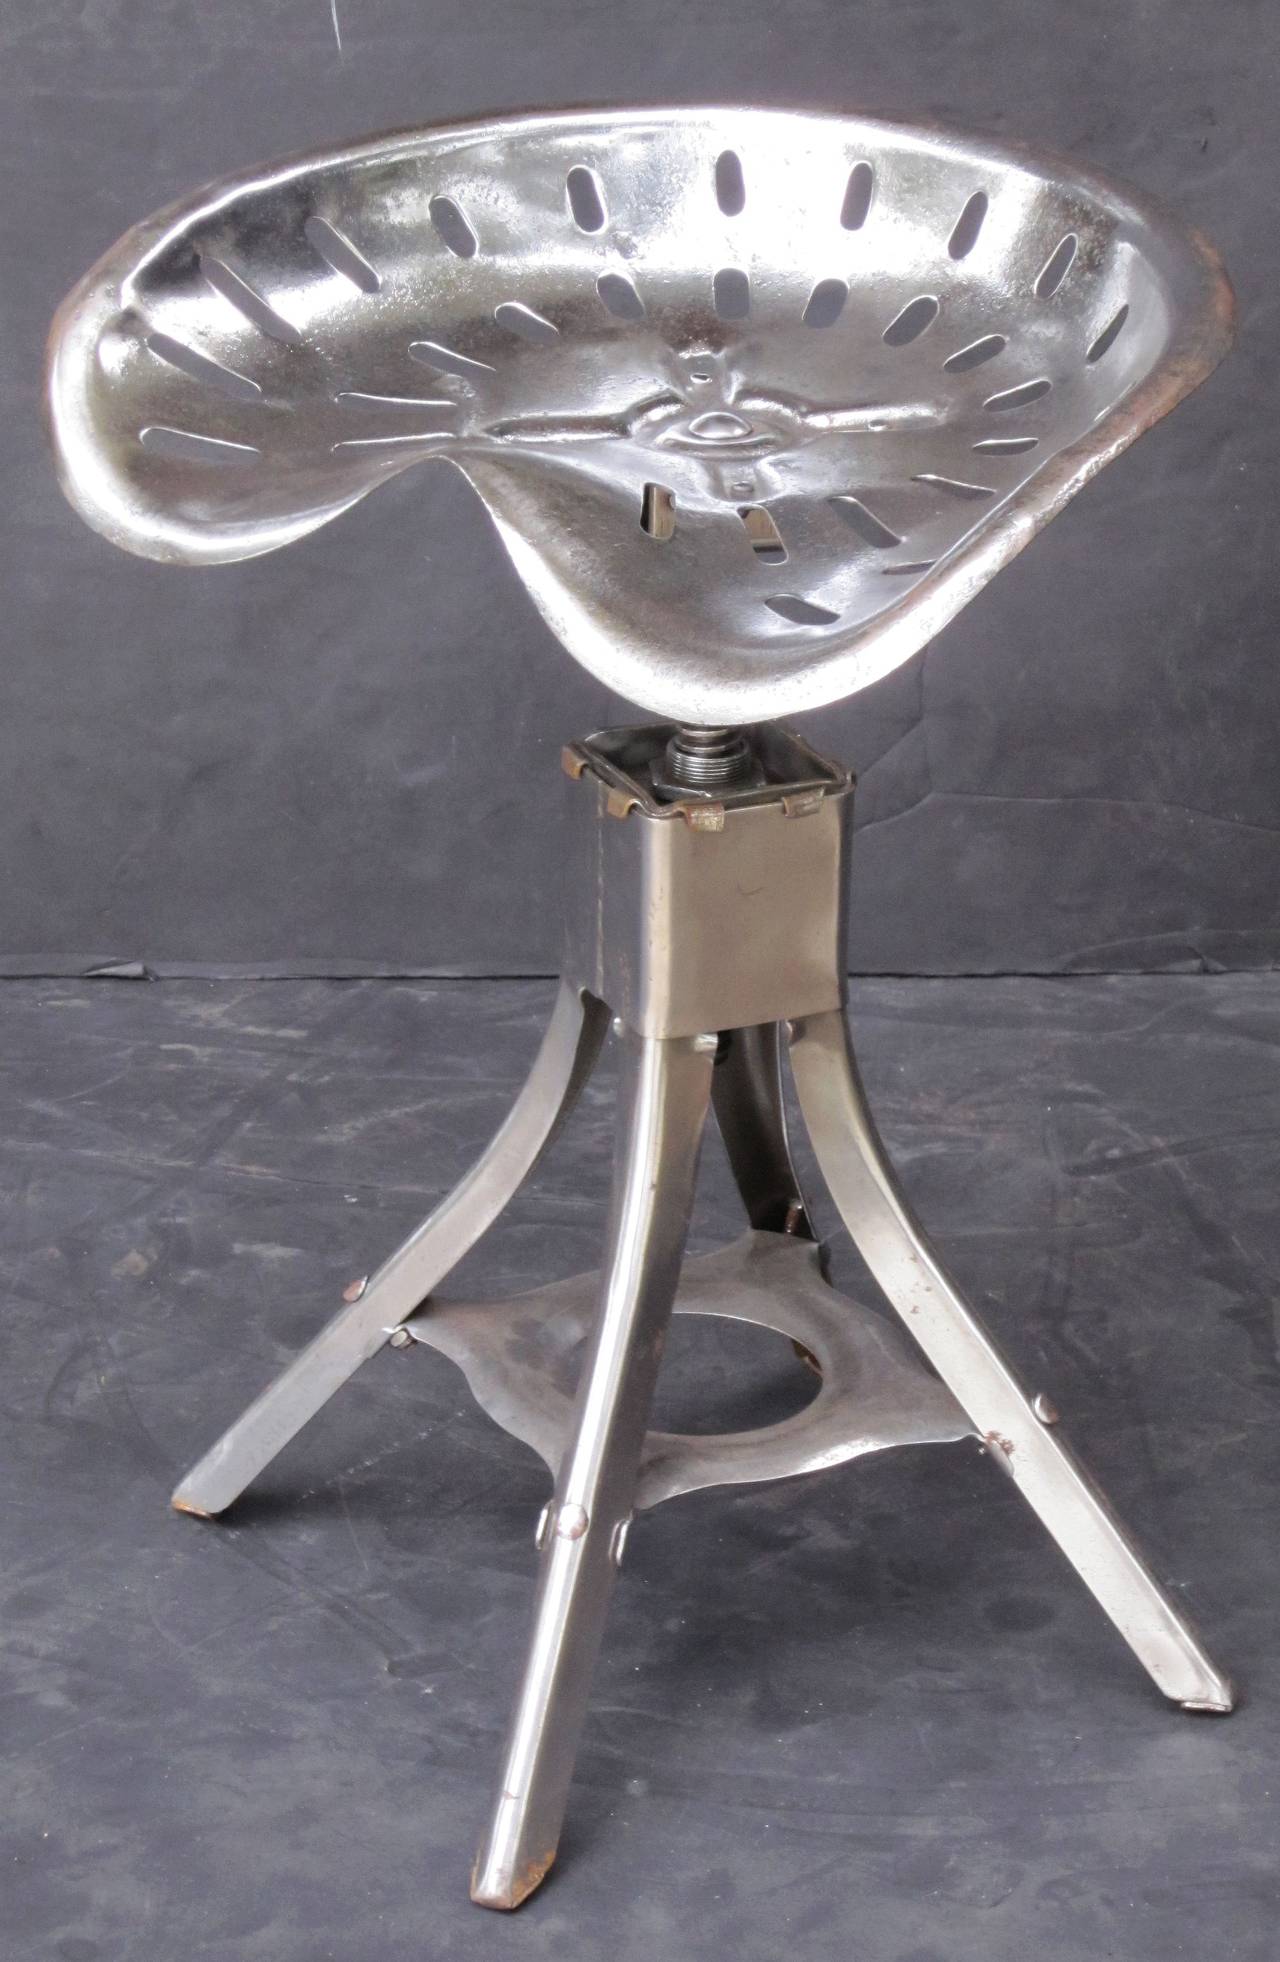 A handsome English tractor seat of polished steel, attached to a revolving four-legged stool stand.

The seat has adjustable height of 16